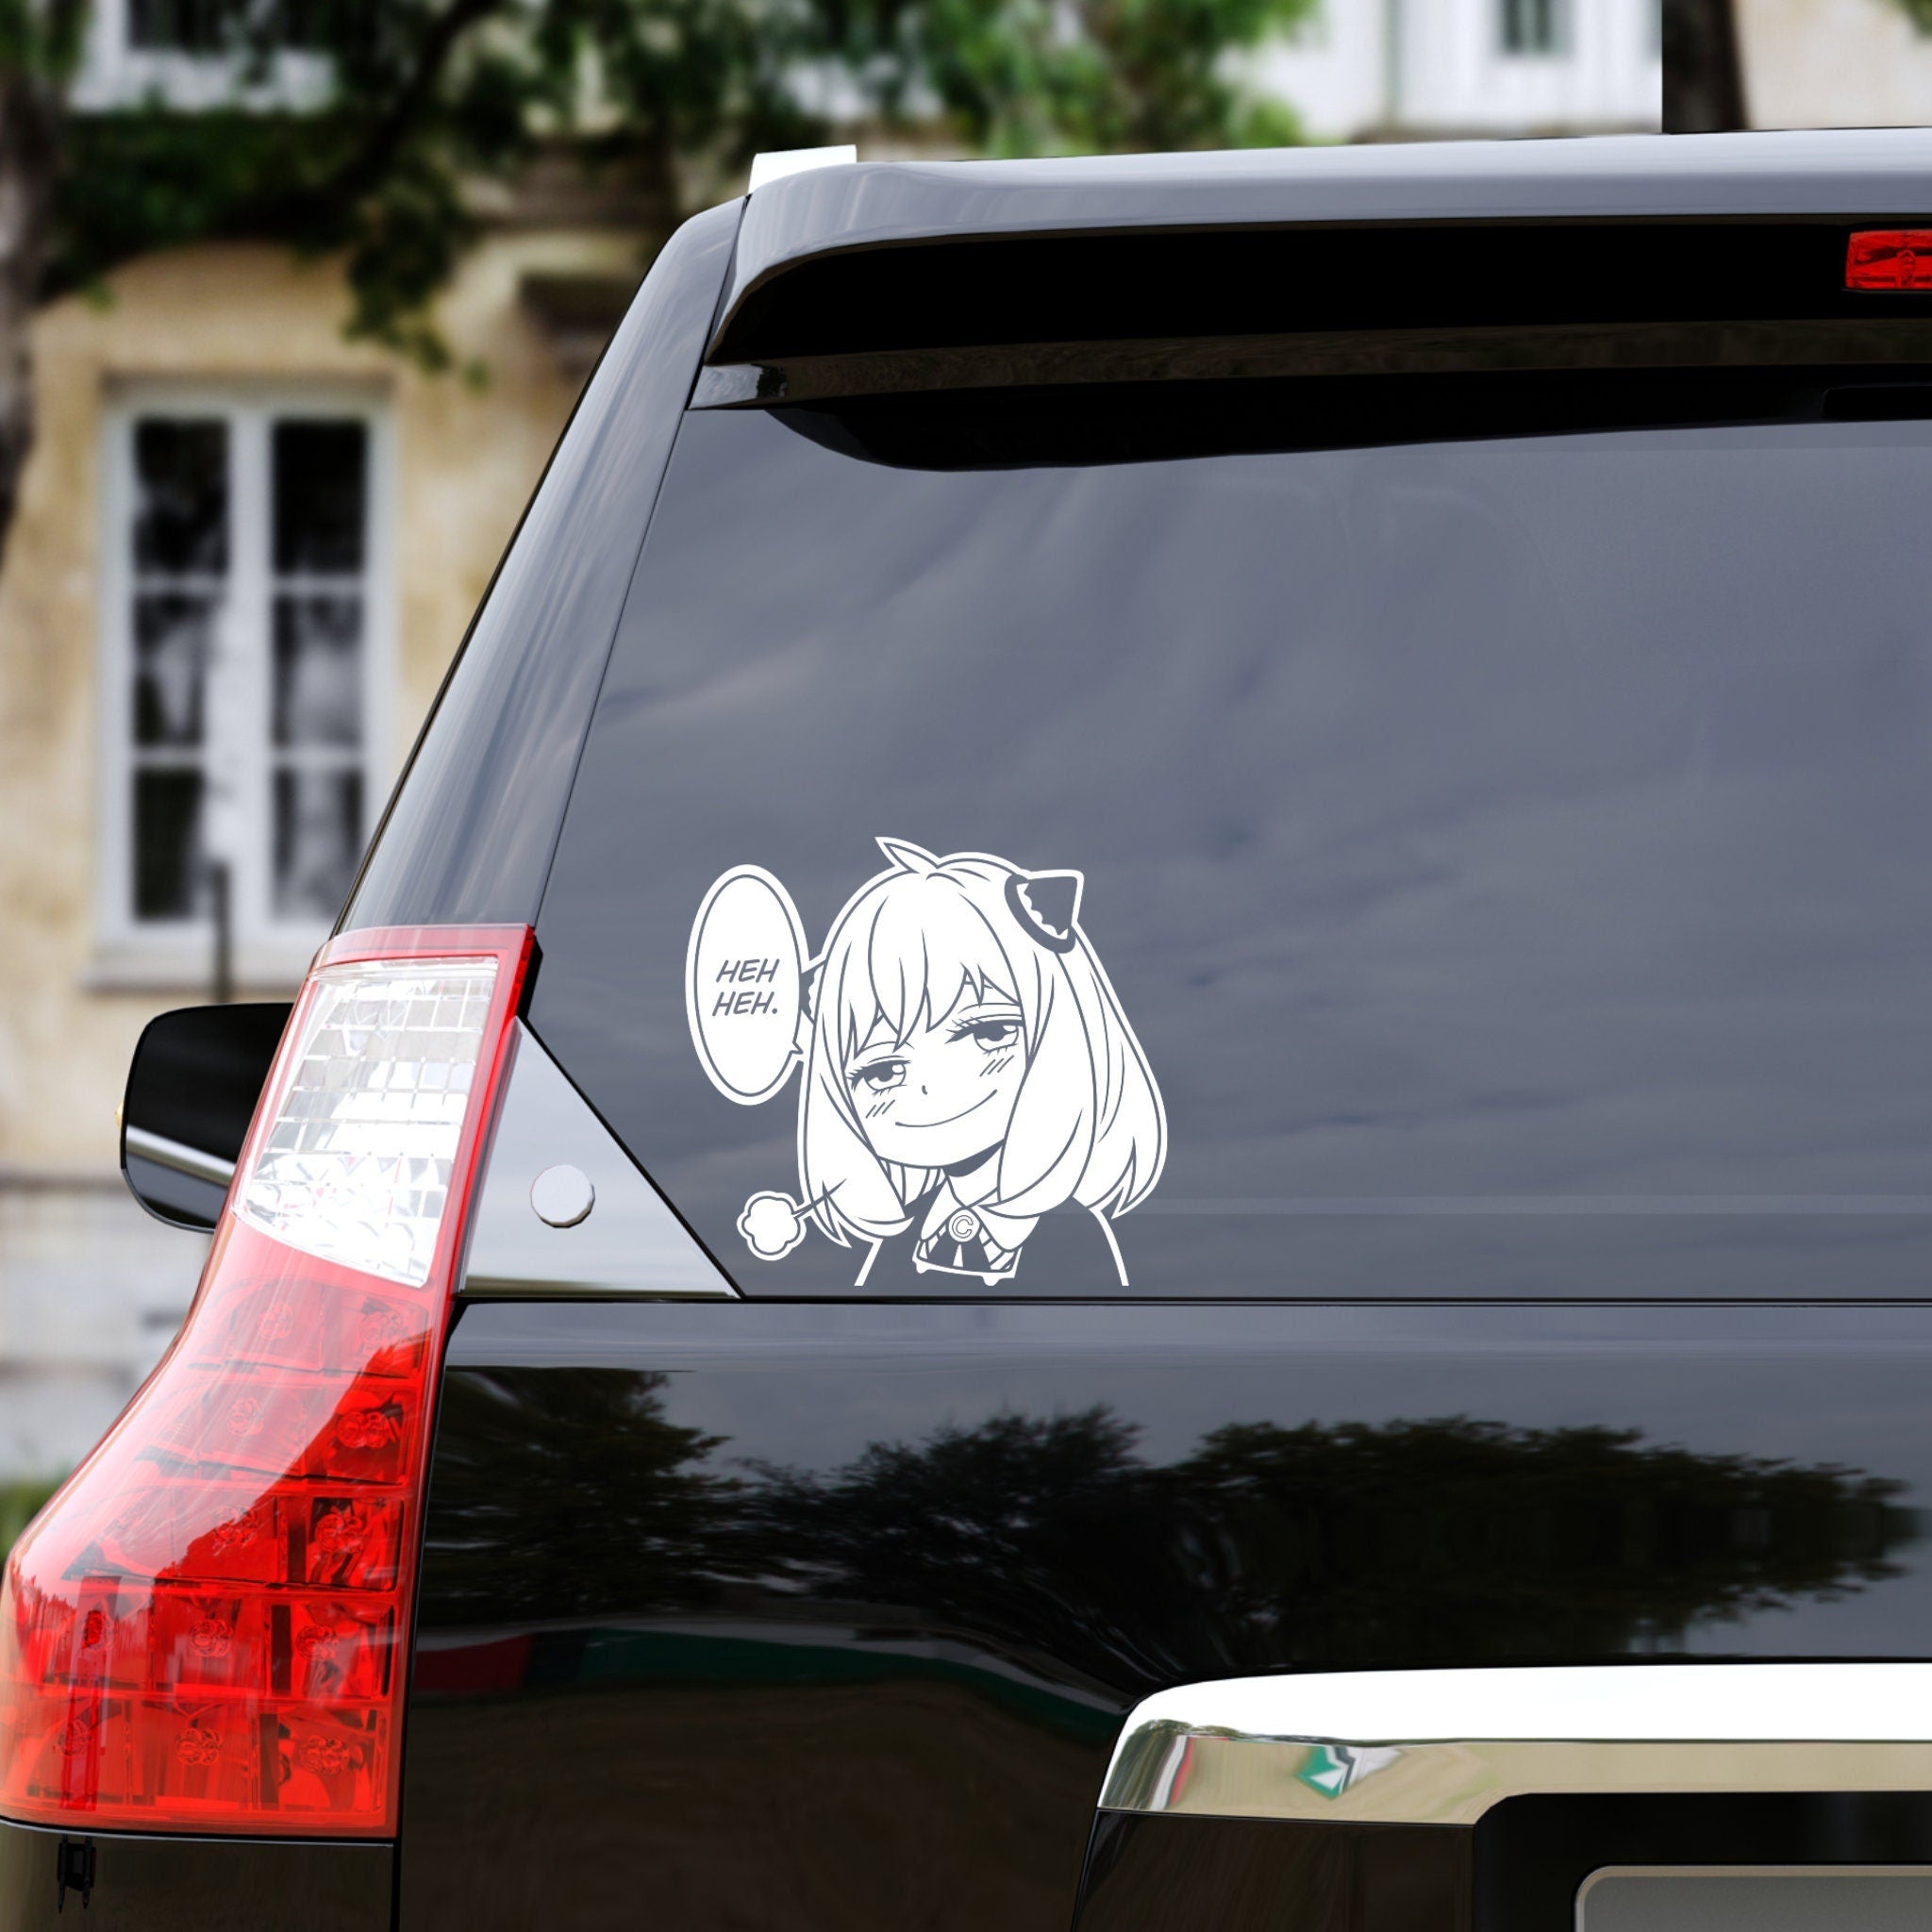 anime car decal, anime car decal Suppliers and Manufacturers at Alibaba.com